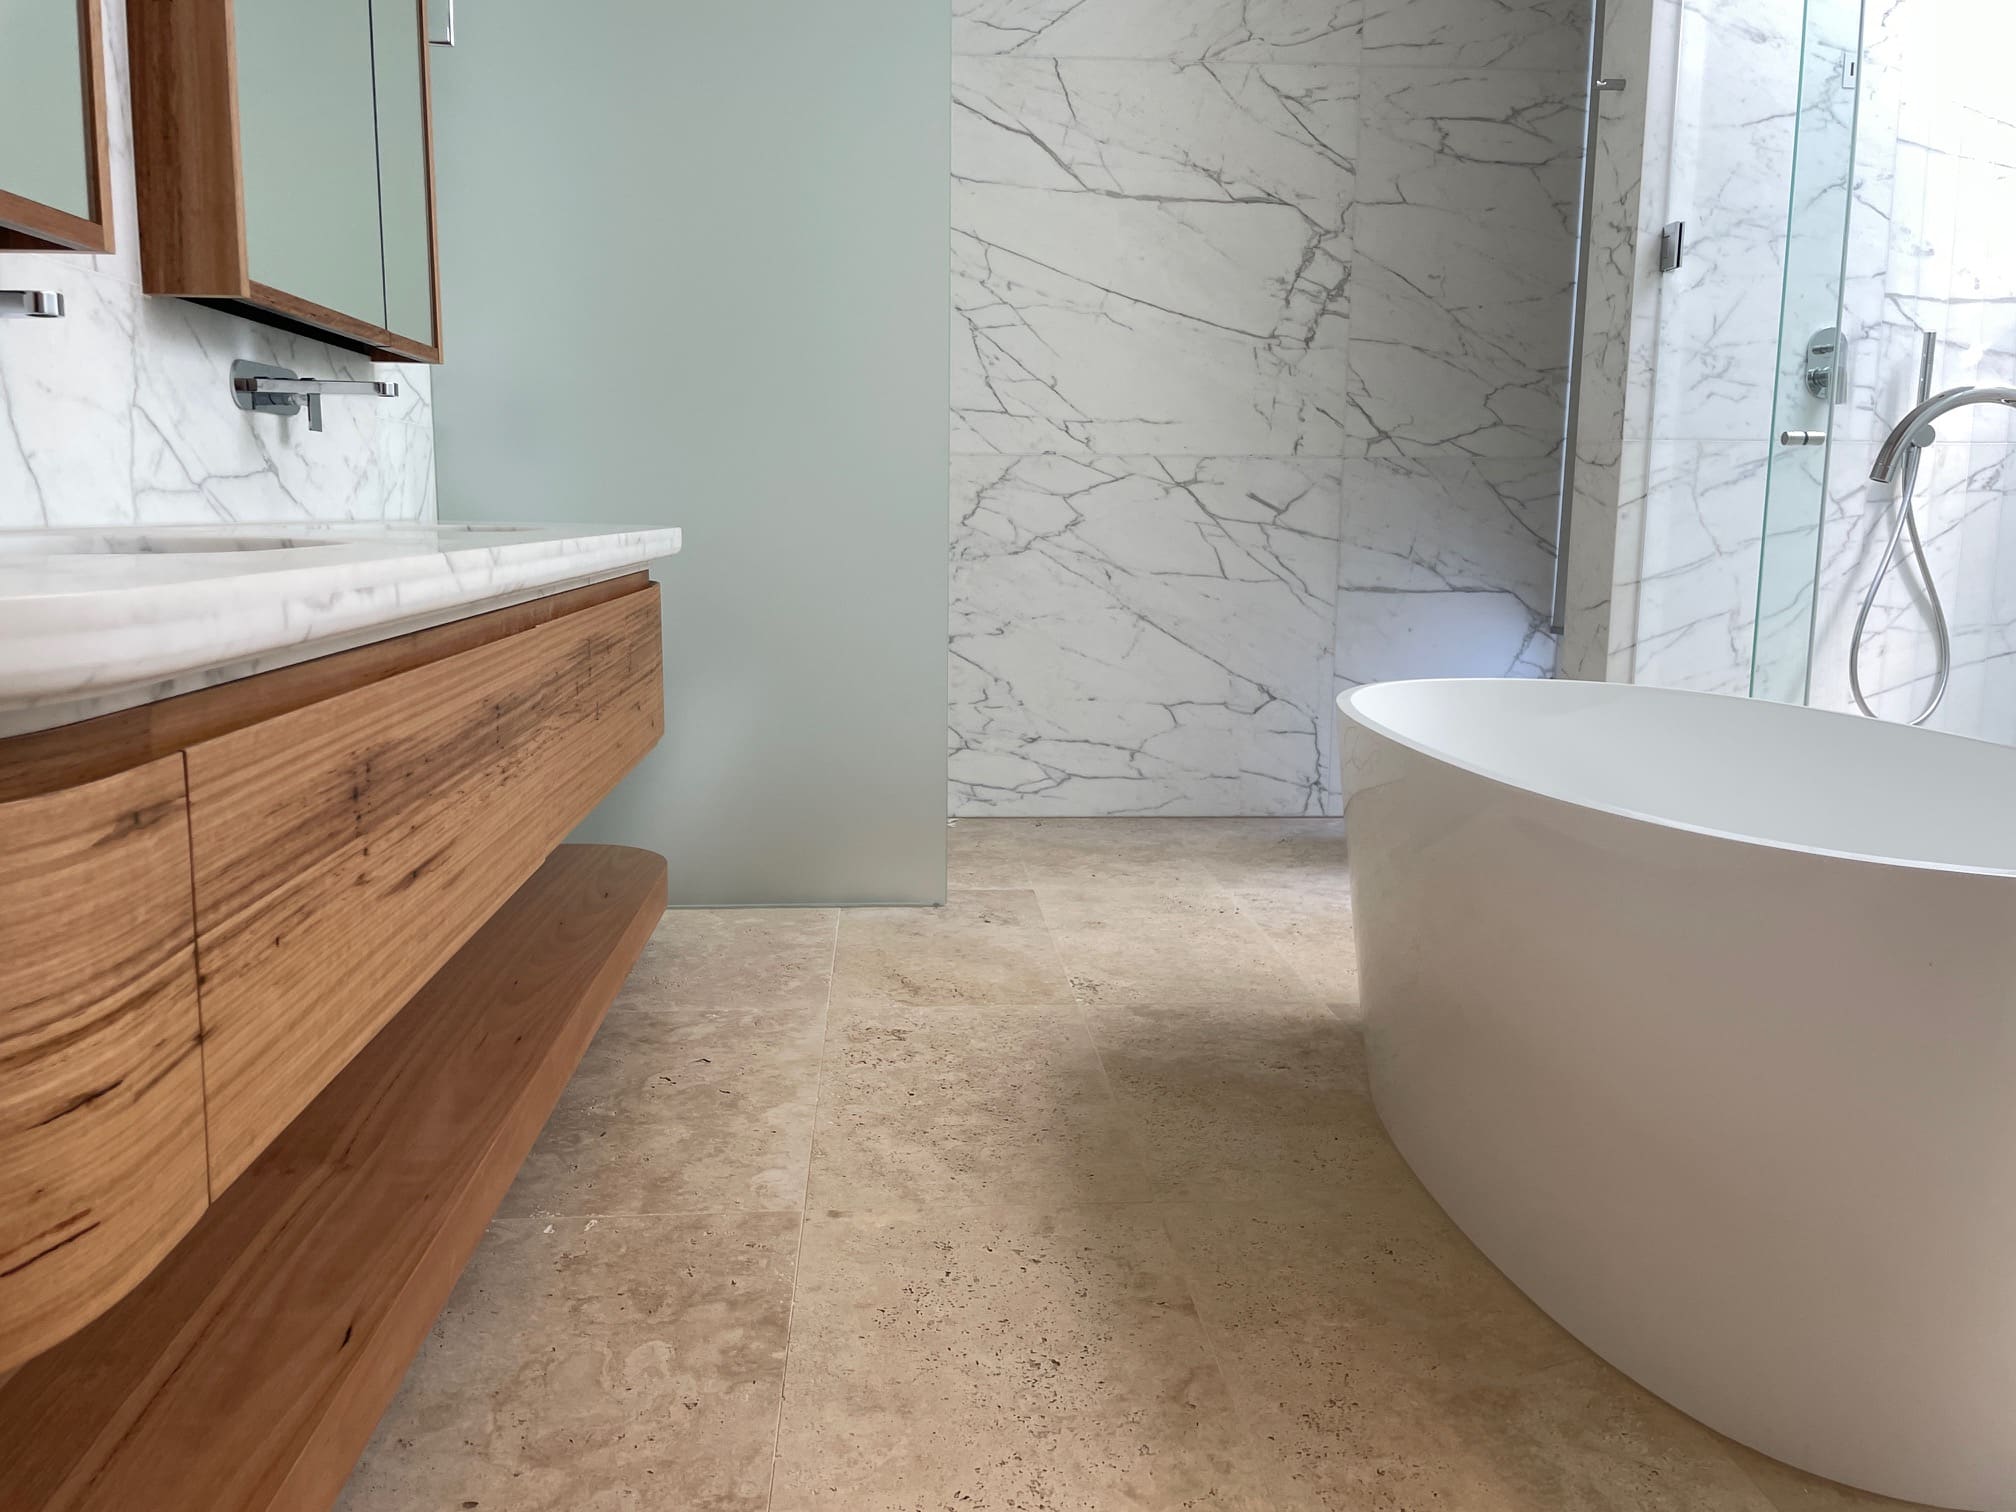 MILANO CROSS CUT UNFILLED & HONED ITALIAN TRAVERTINE_RMS TRADERS_NATURAL STONE BATHROOM TILES SLAB SUPPLIER MELBOURNE (4)